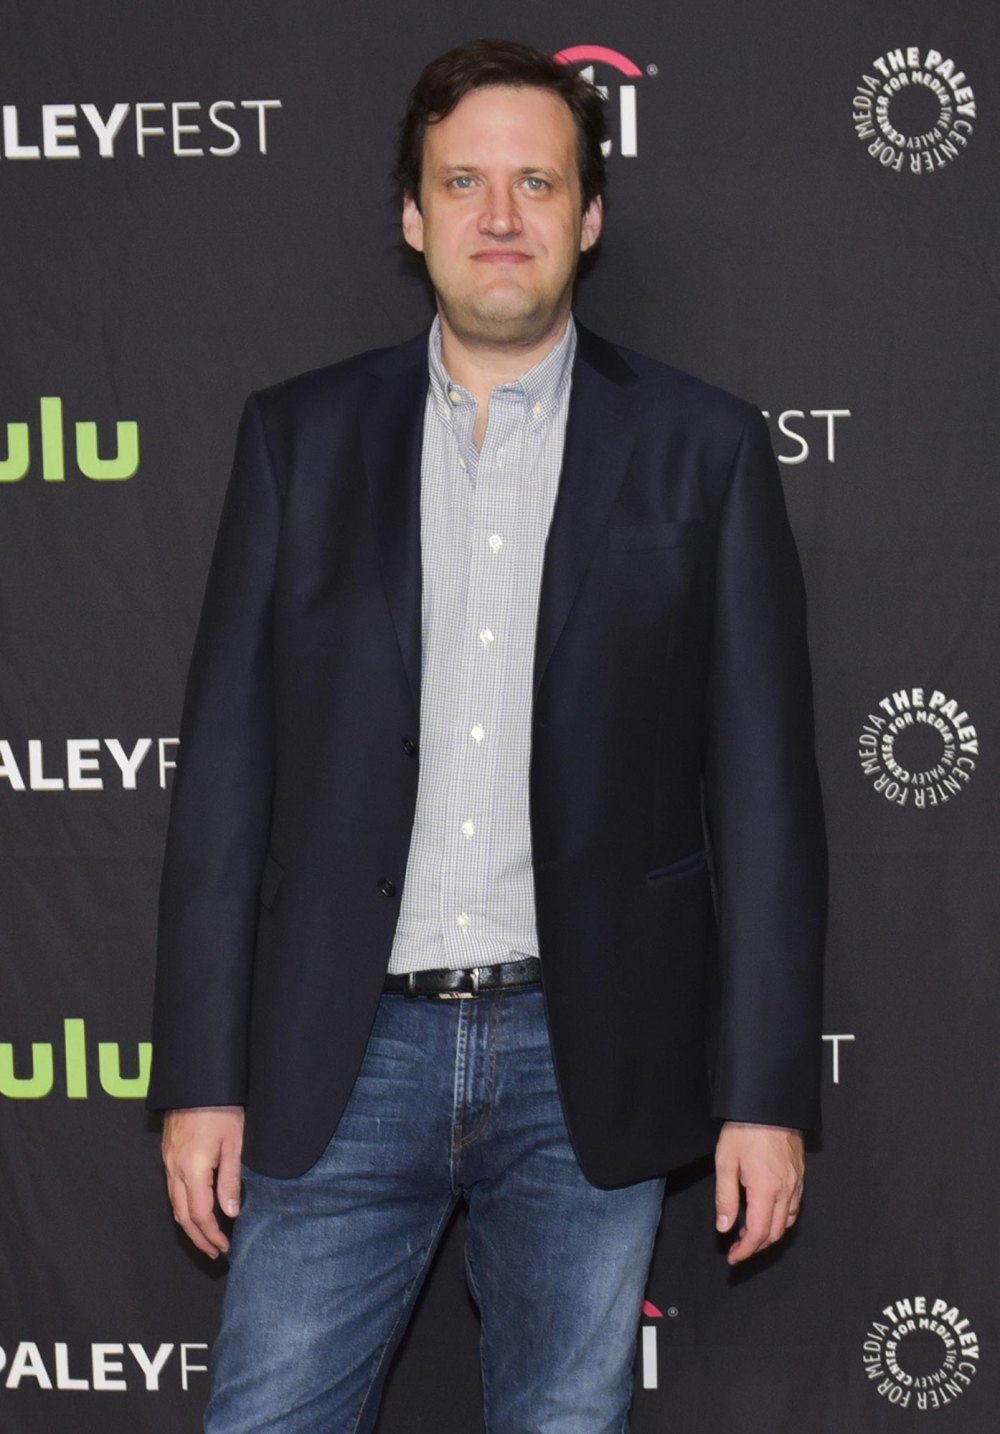 The Flash Executive Producer Andrew Kreisberg Arrested for Forcible Touching at Bar Mitzvah 479